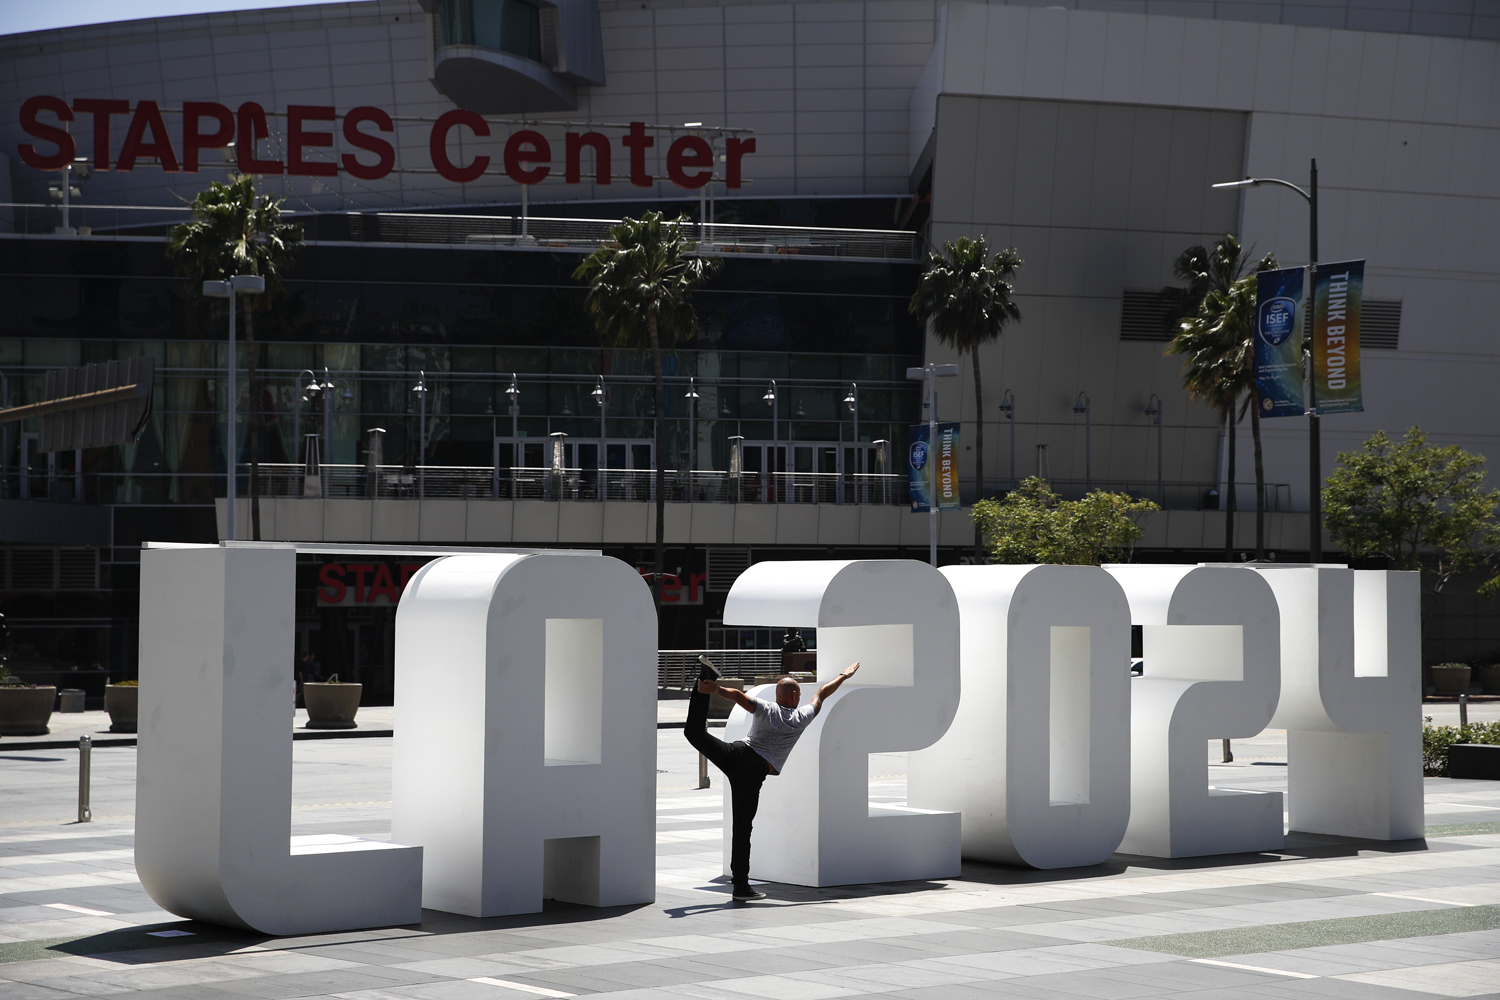 Yoga instructor Michael Phillip poses with a Los Angeles 2024 sign outside Staples Center, Friday, May 12, 2017, in Los Angeles. (Jae C. Hong/AP)